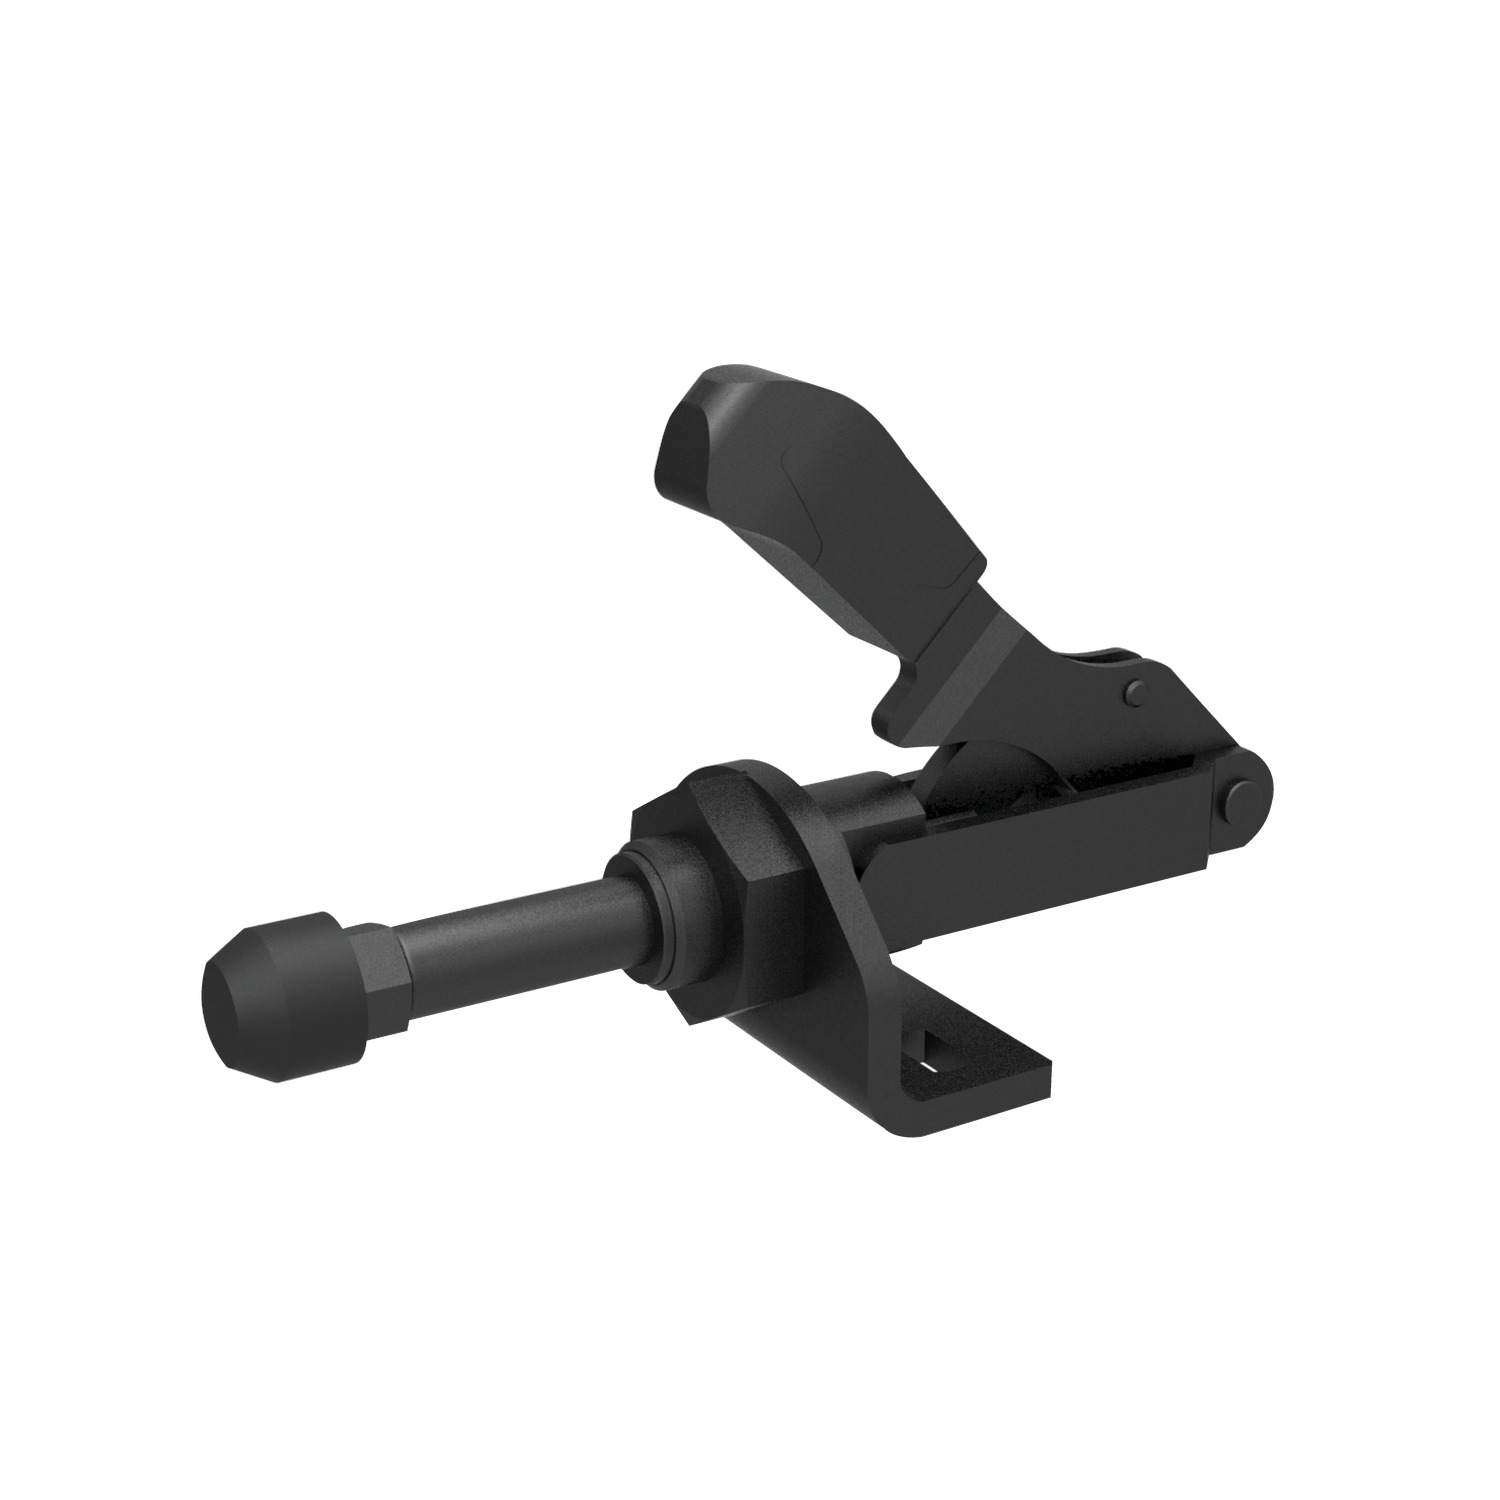 42000.2 - Push-Pull Type Toggle Clamps - Black